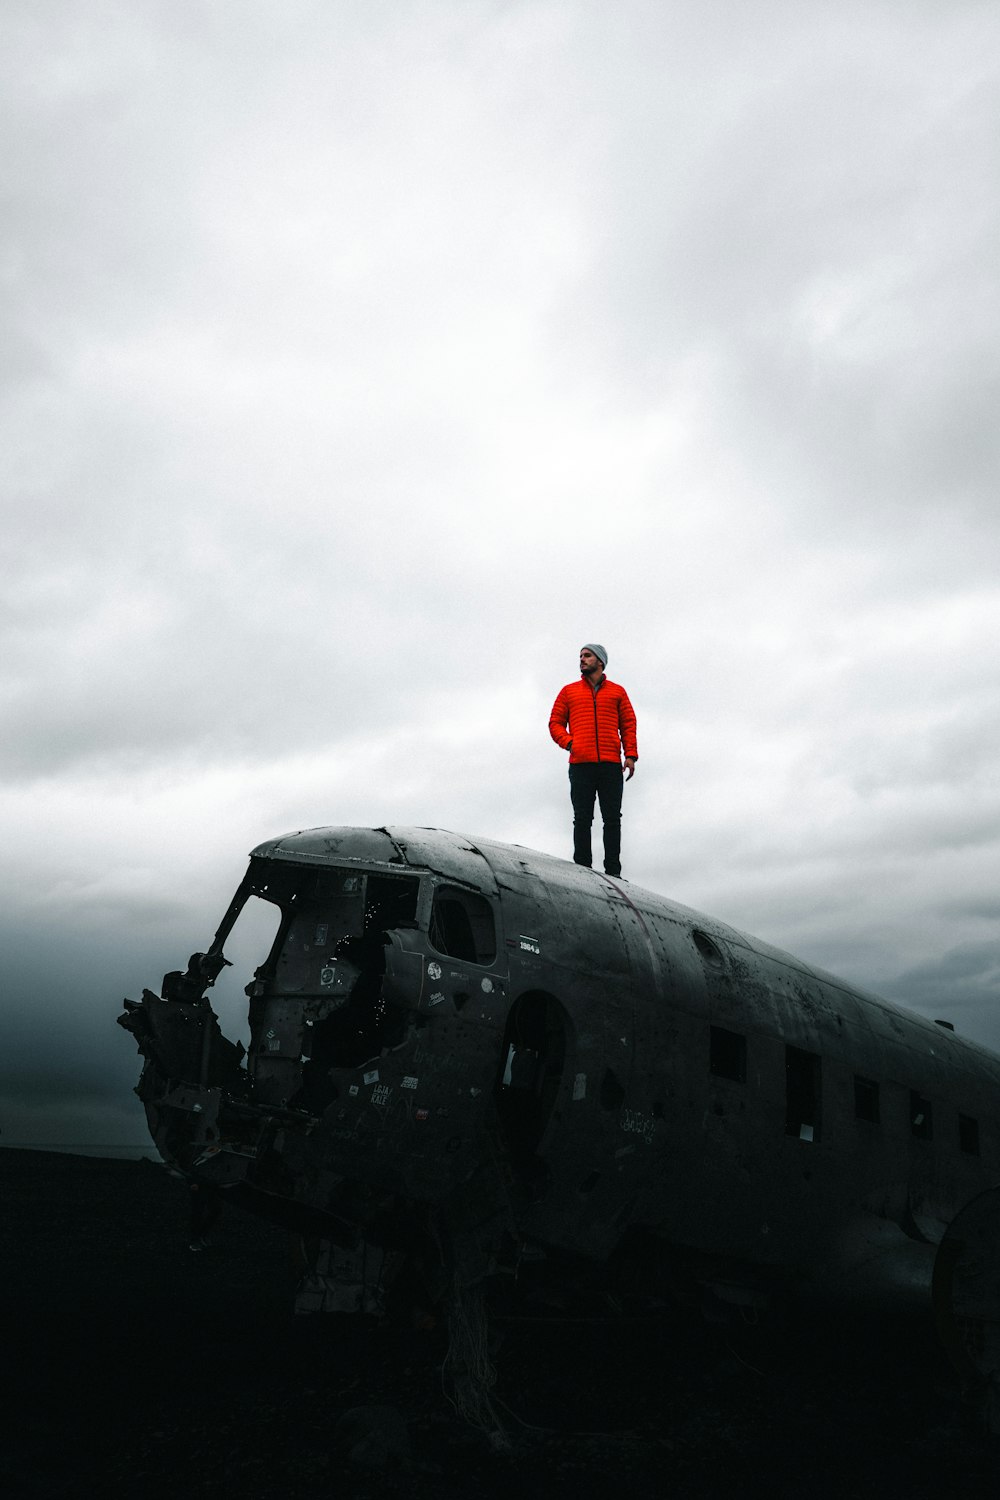 man in red jacket standing on black airplane under gray cloudy sky during daytime